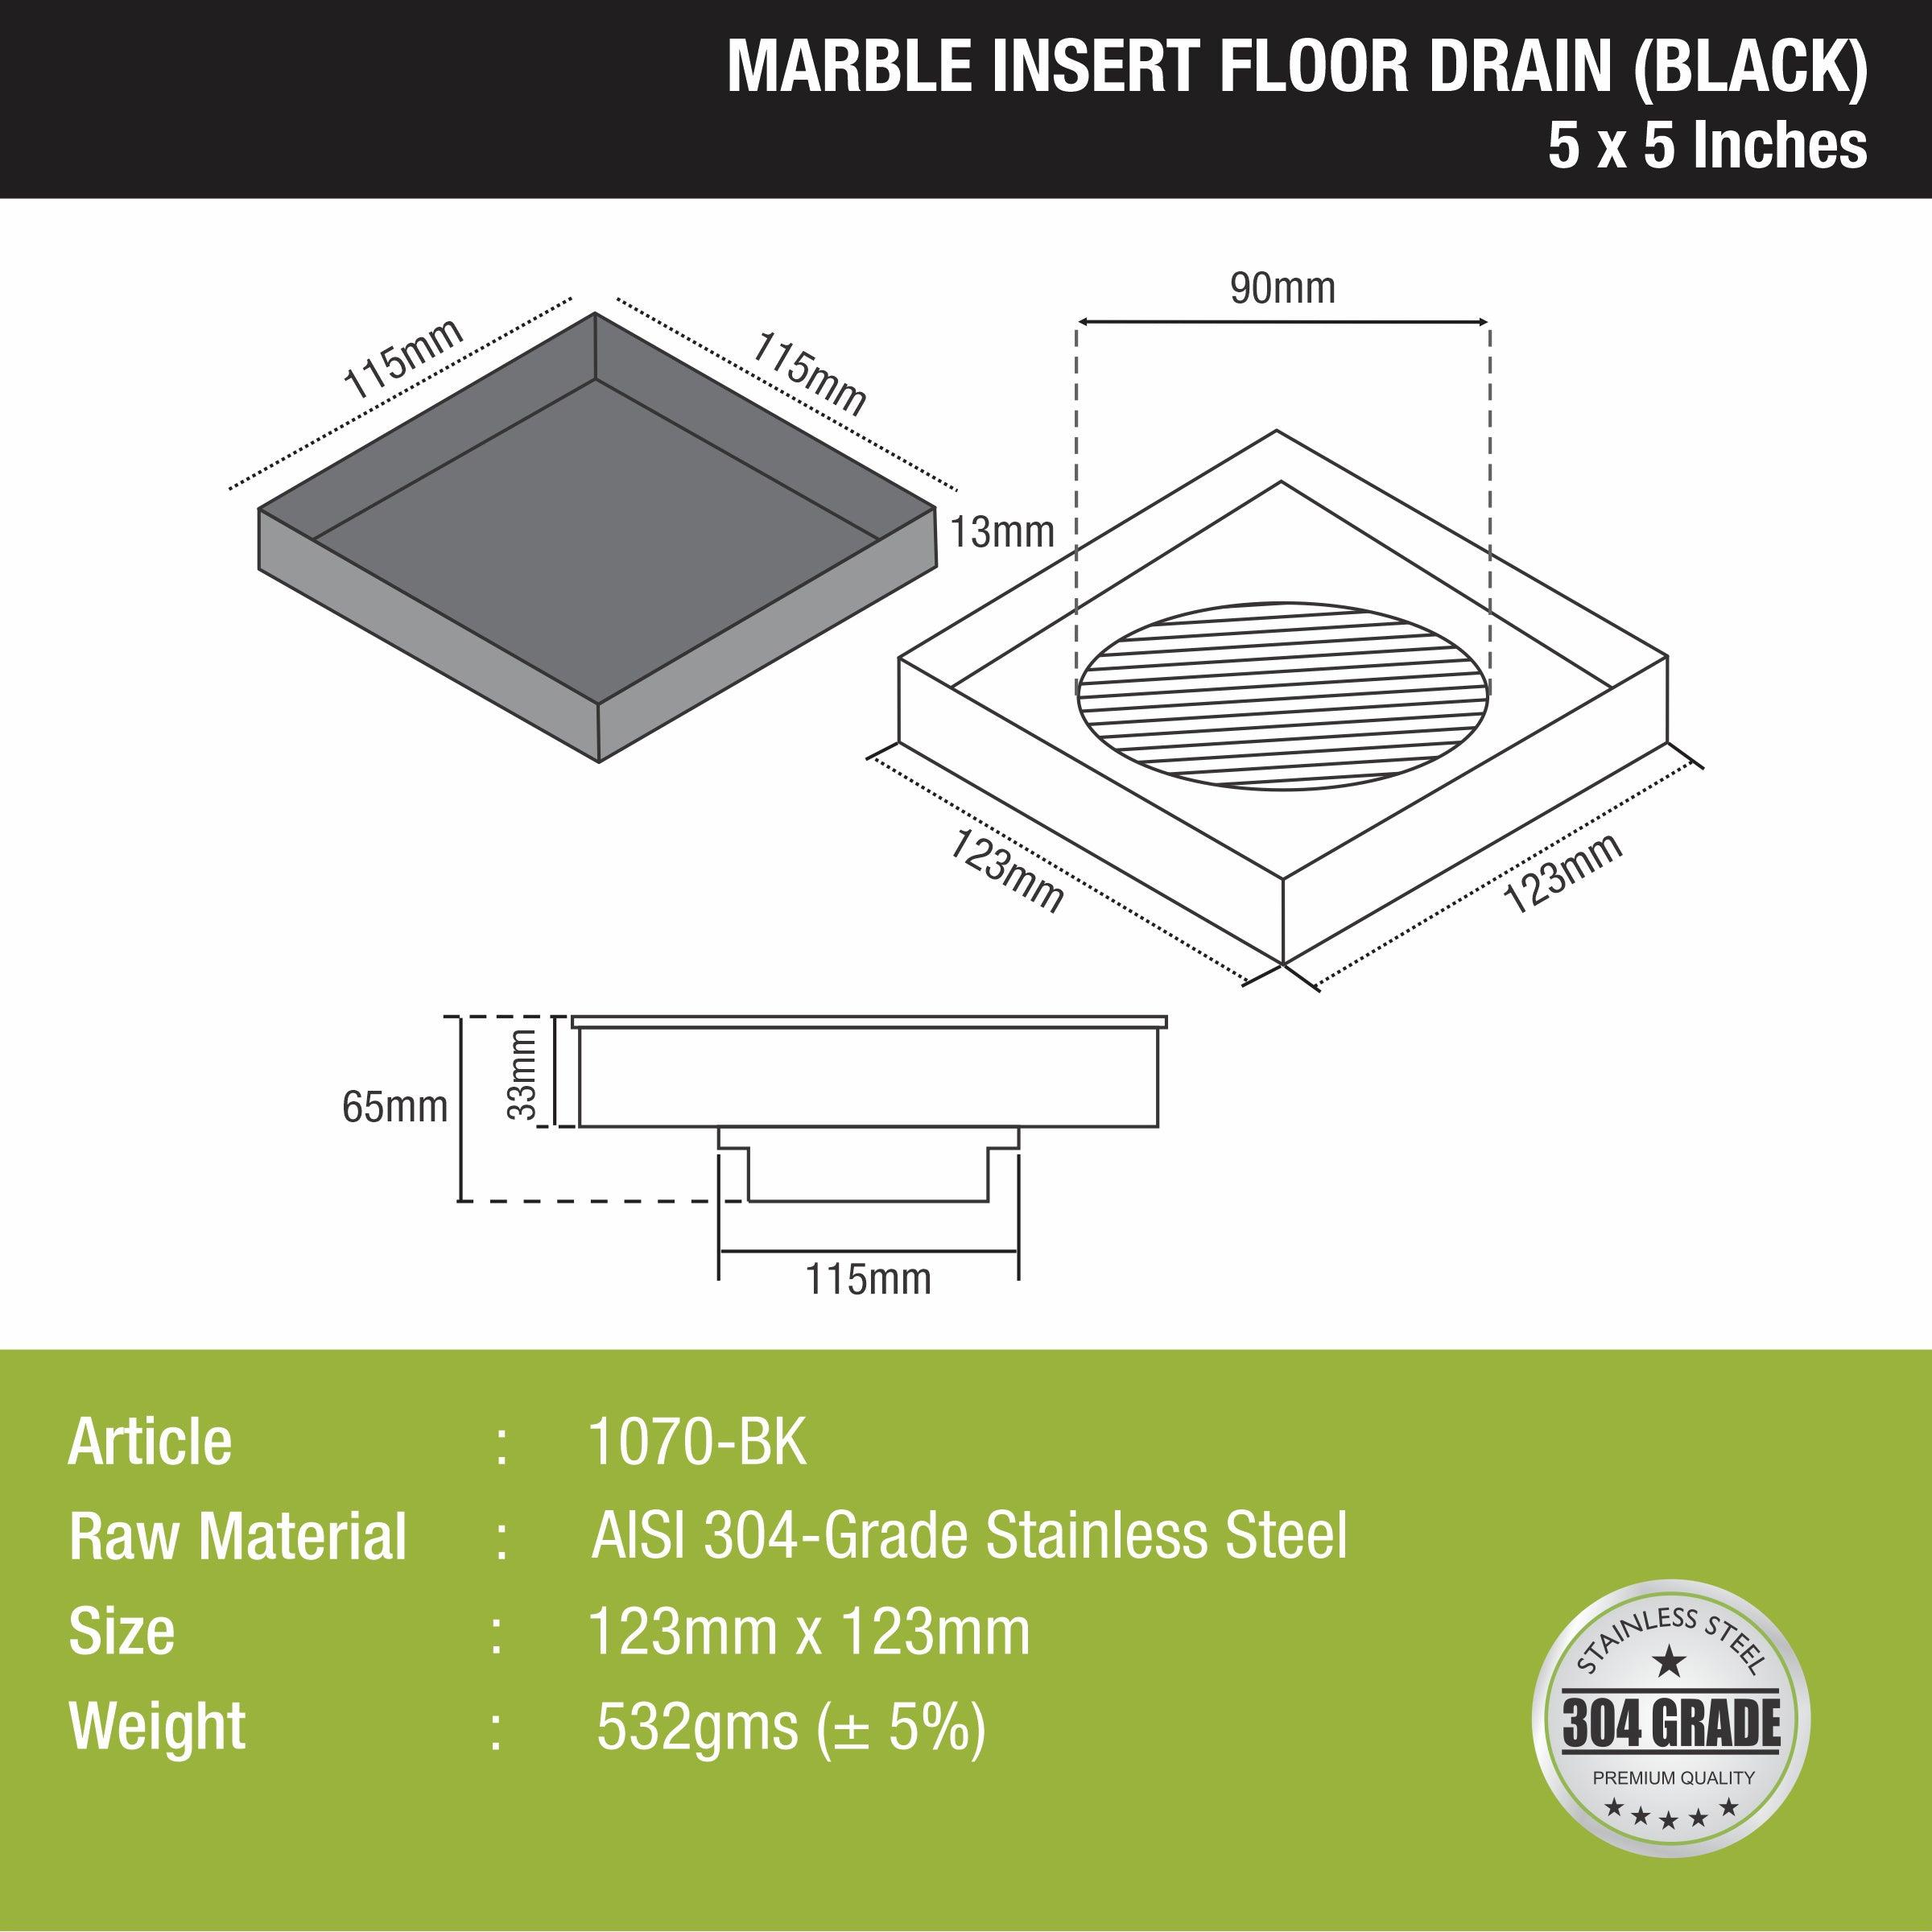 Marble Insert Square Floor Drain - Black (5 x 5 Inches) size and details